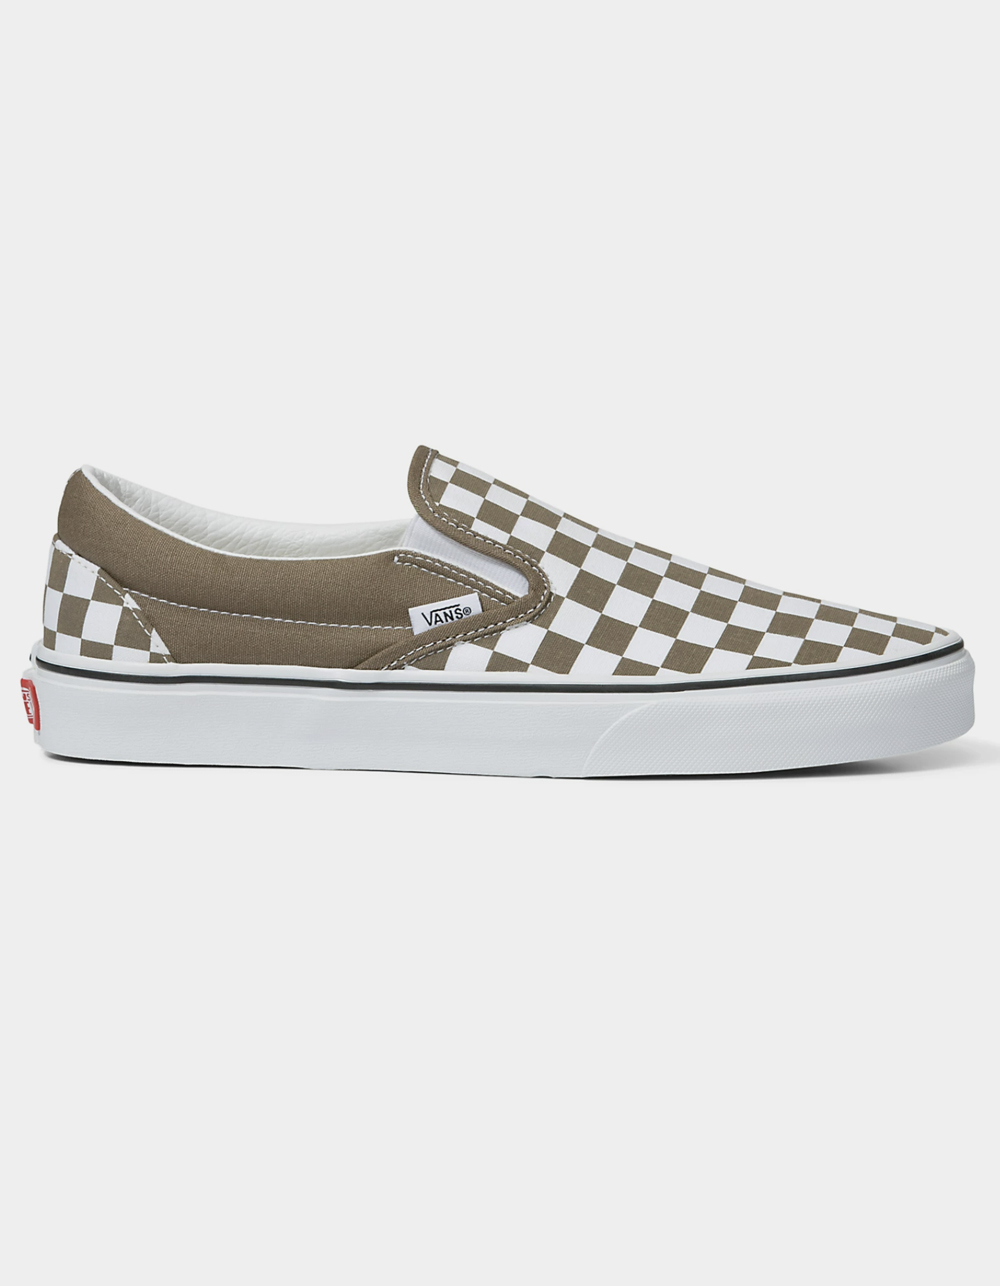 VANS Checkerboard Classic Slip-On Shoes - BROWN | Tillys